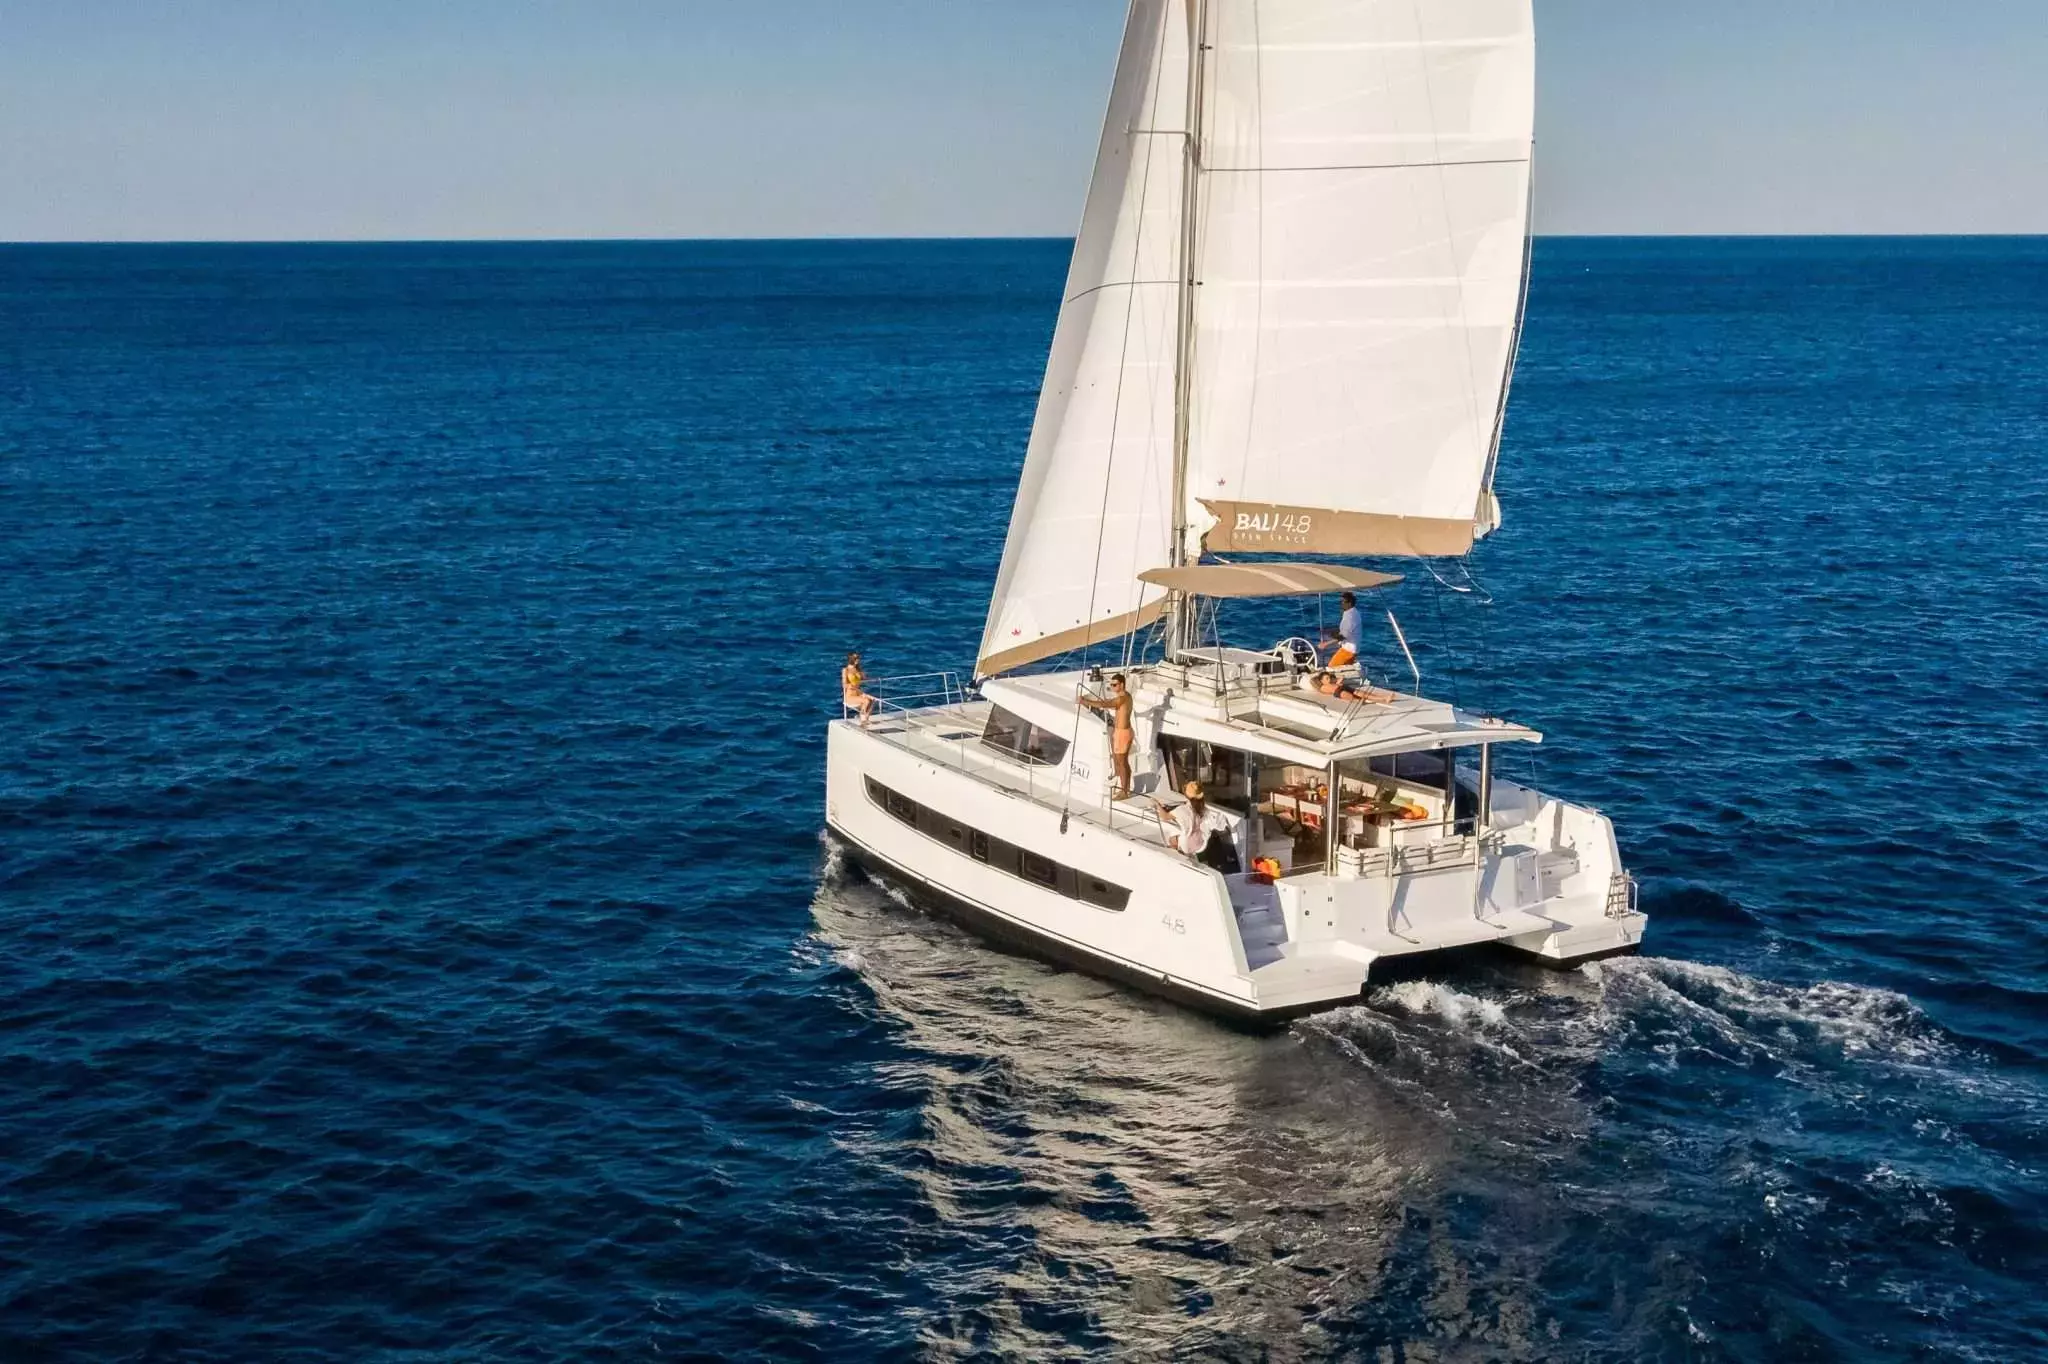 Kittiwake by Catana - Special Offer for a private Sailing Catamaran Charter in Exuma with a crew